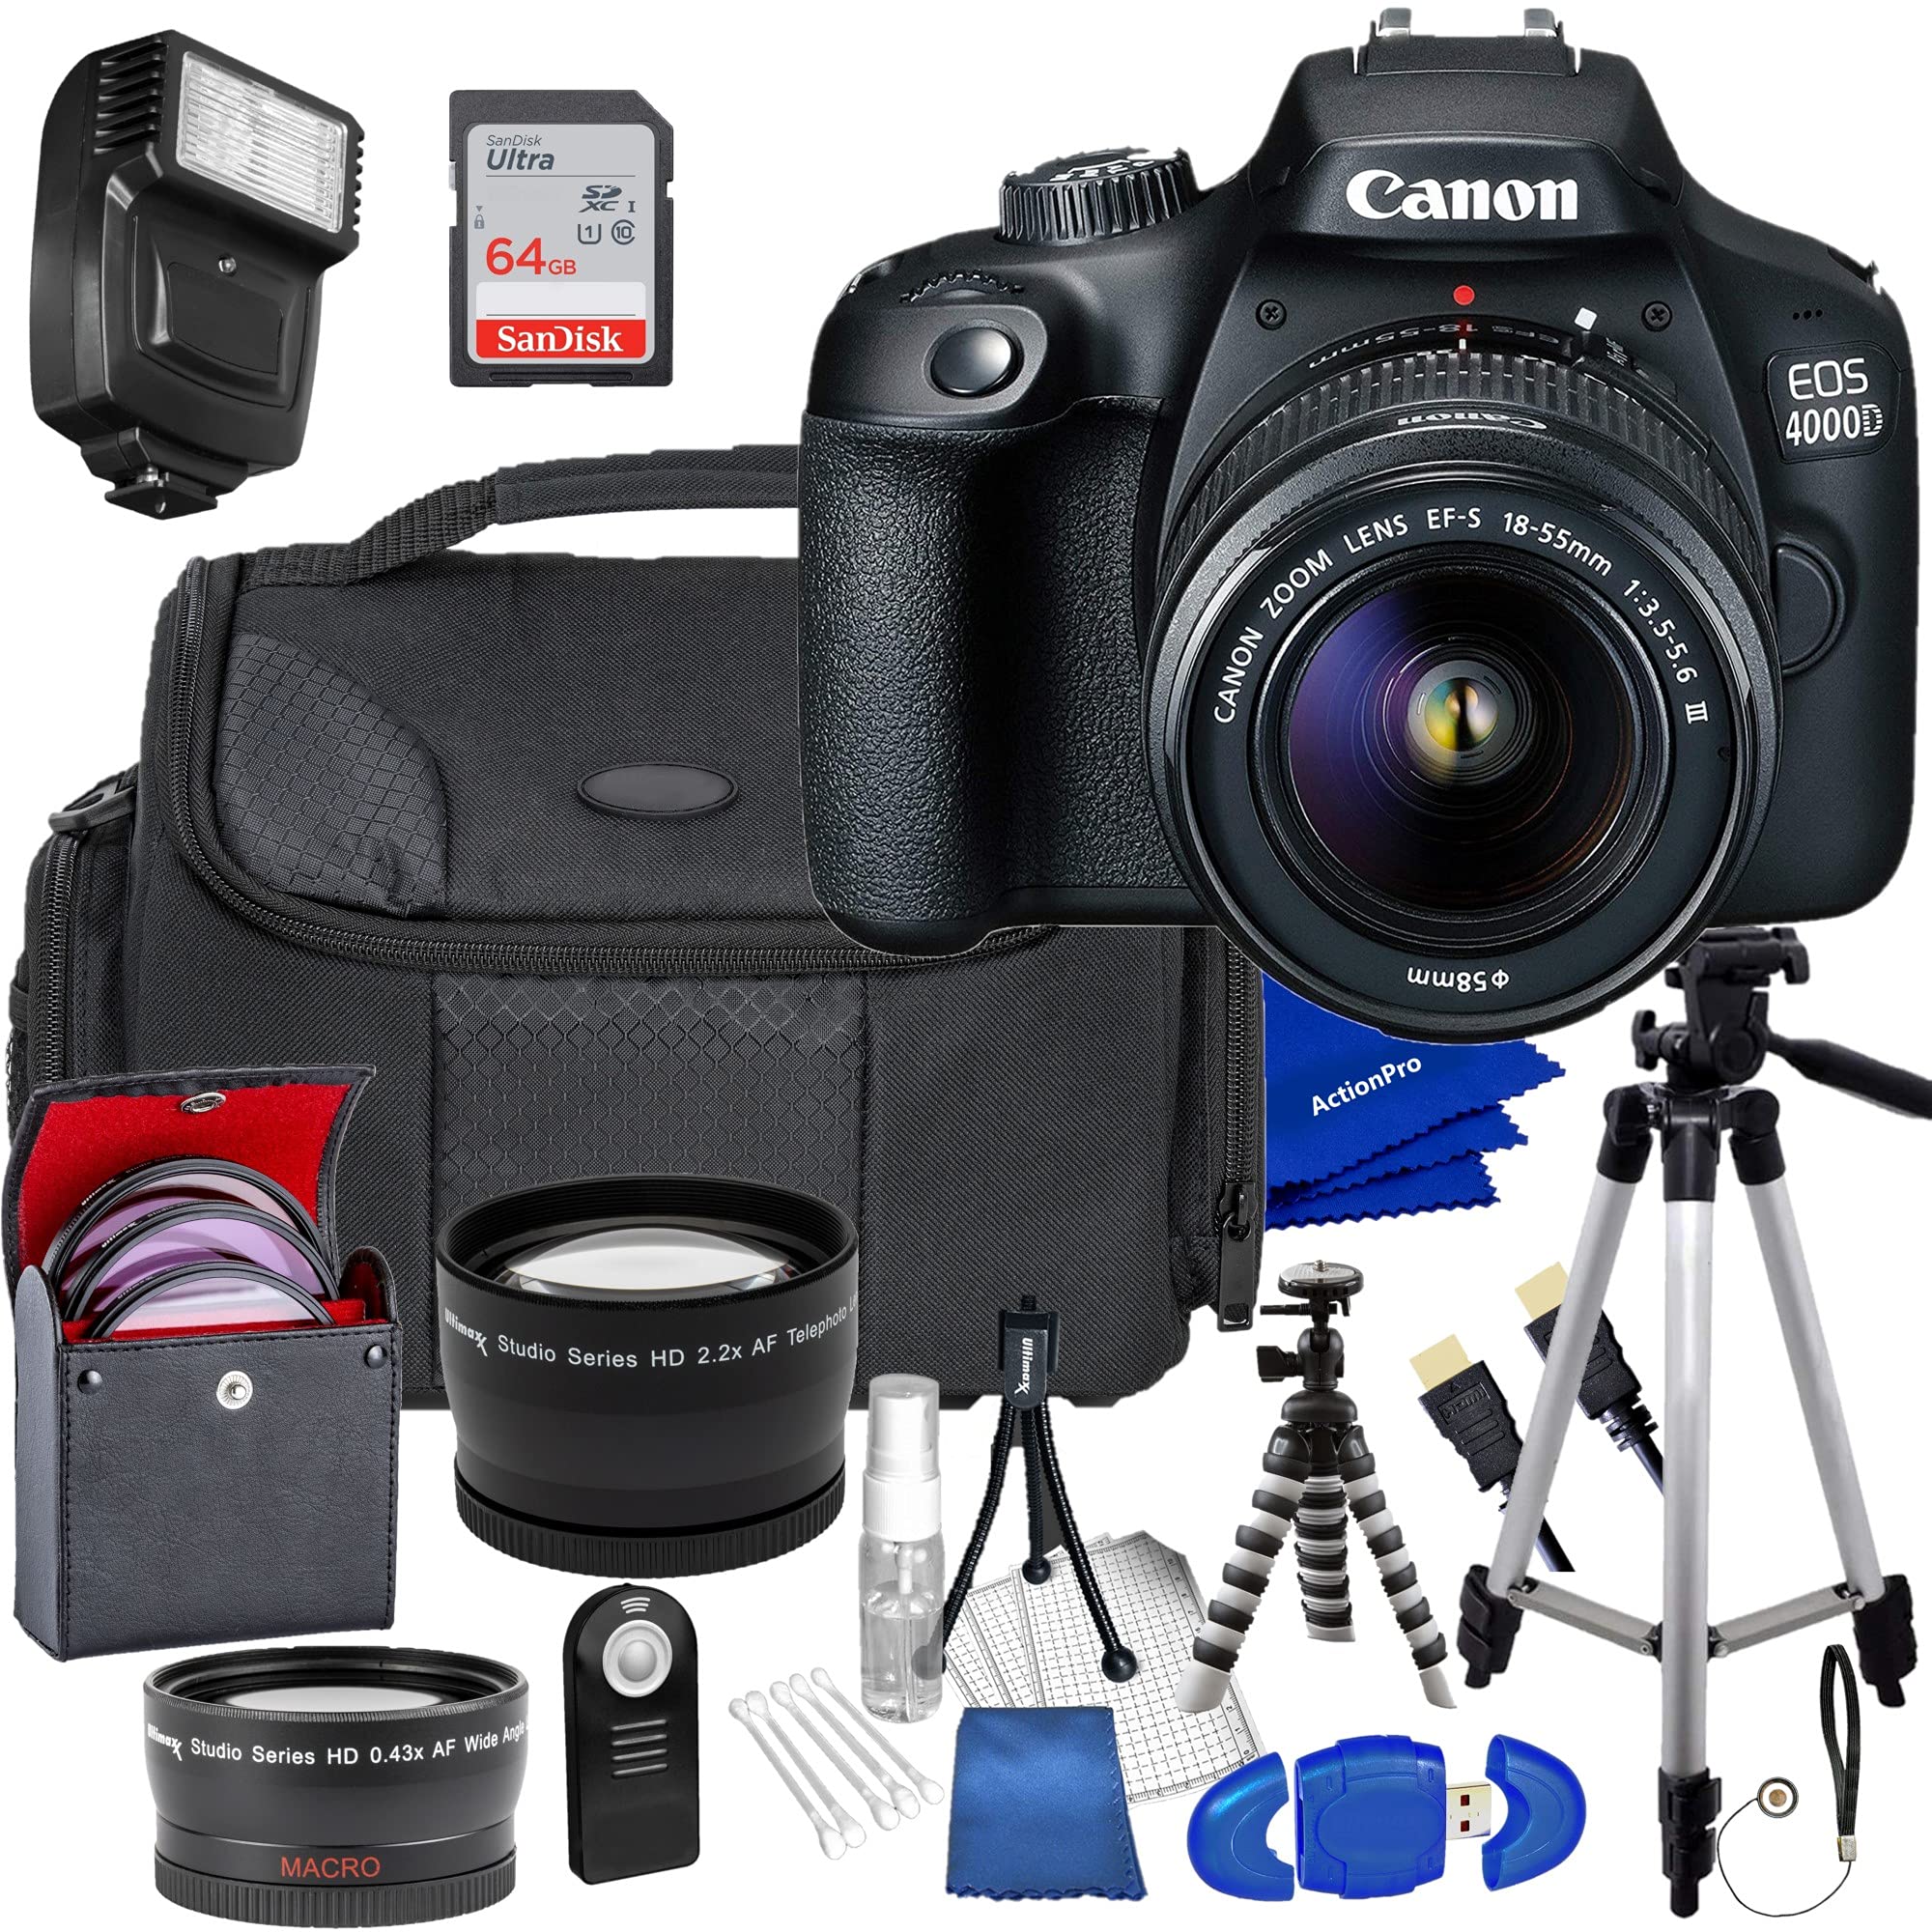 Canon Intl. EOS 4000D DSLR Camera with EF-S 18-55mm F/3.5-5.6 III Lens, ActionPro Bundle Includes 64 GB SanDisk Memory Card, Tripods, Flash, Bag, Filters and More (Large Kit) A (Renewed)